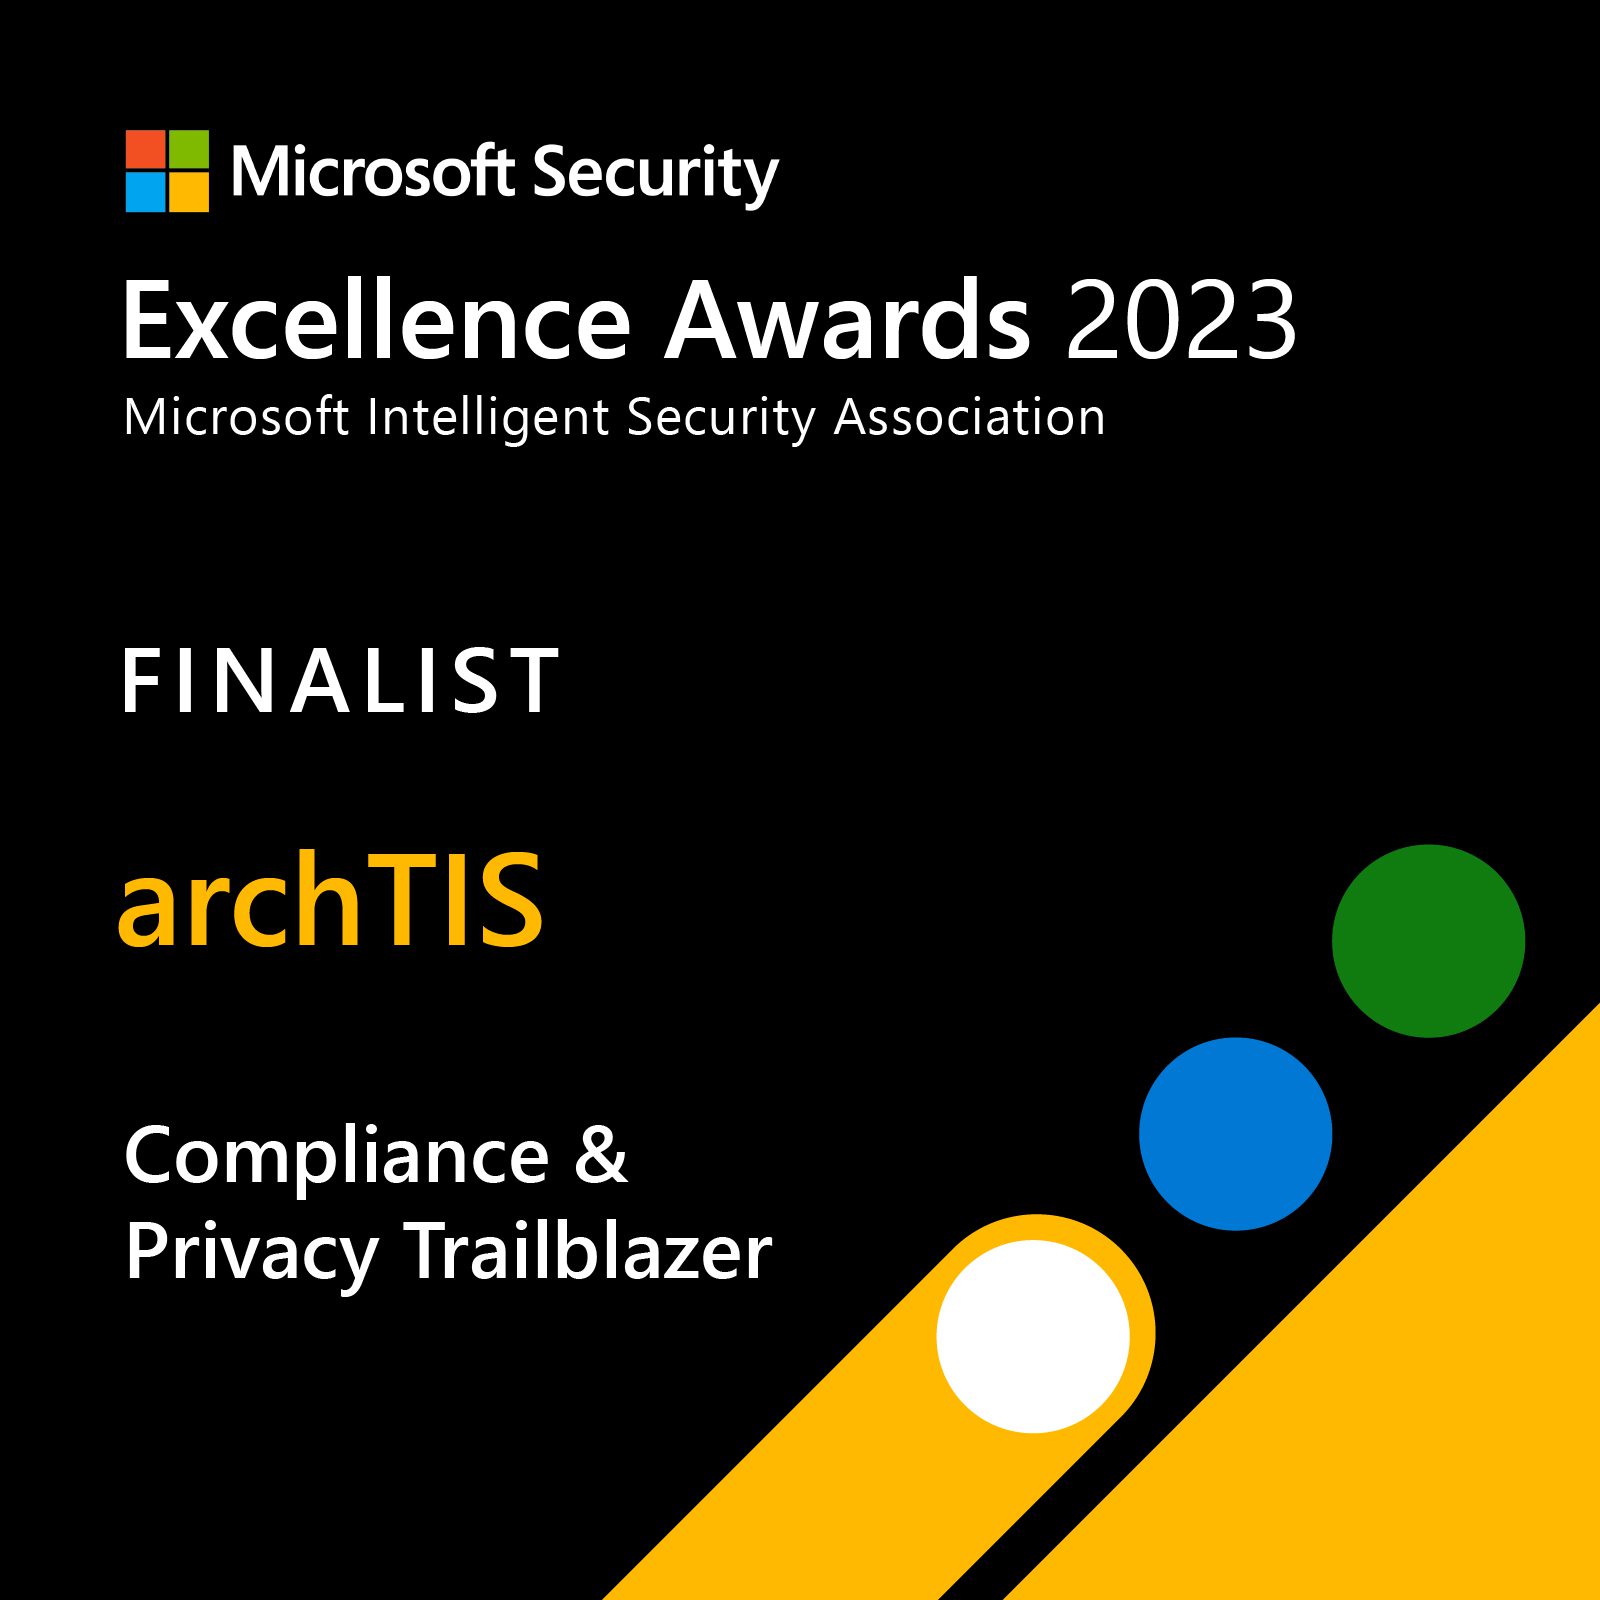 archTIS Recognized as a Microsoft Security Excellence Awards Finalist for Compliance & Privacy Trailblazer